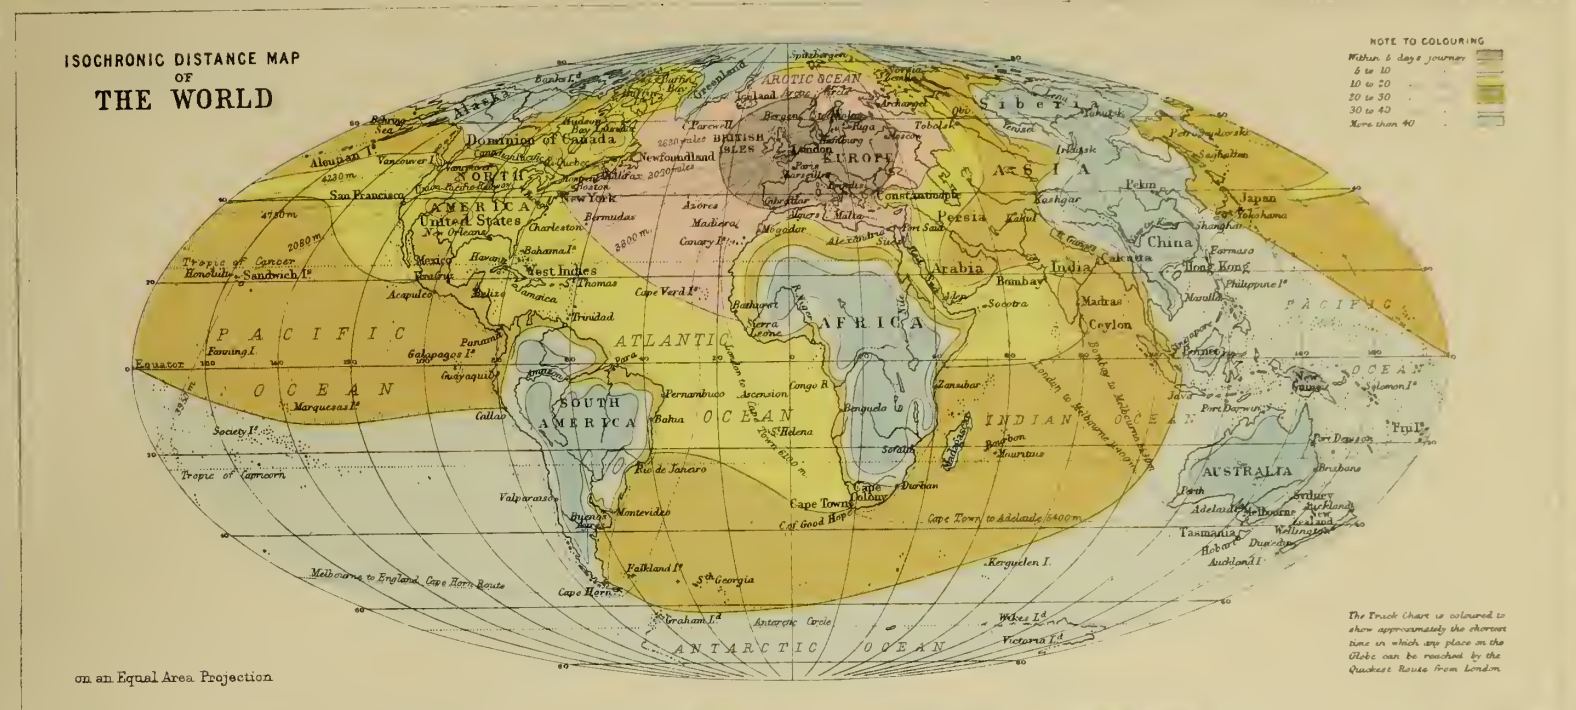 A map showing travel times from London, from J.G. Bartholomew's 1889 